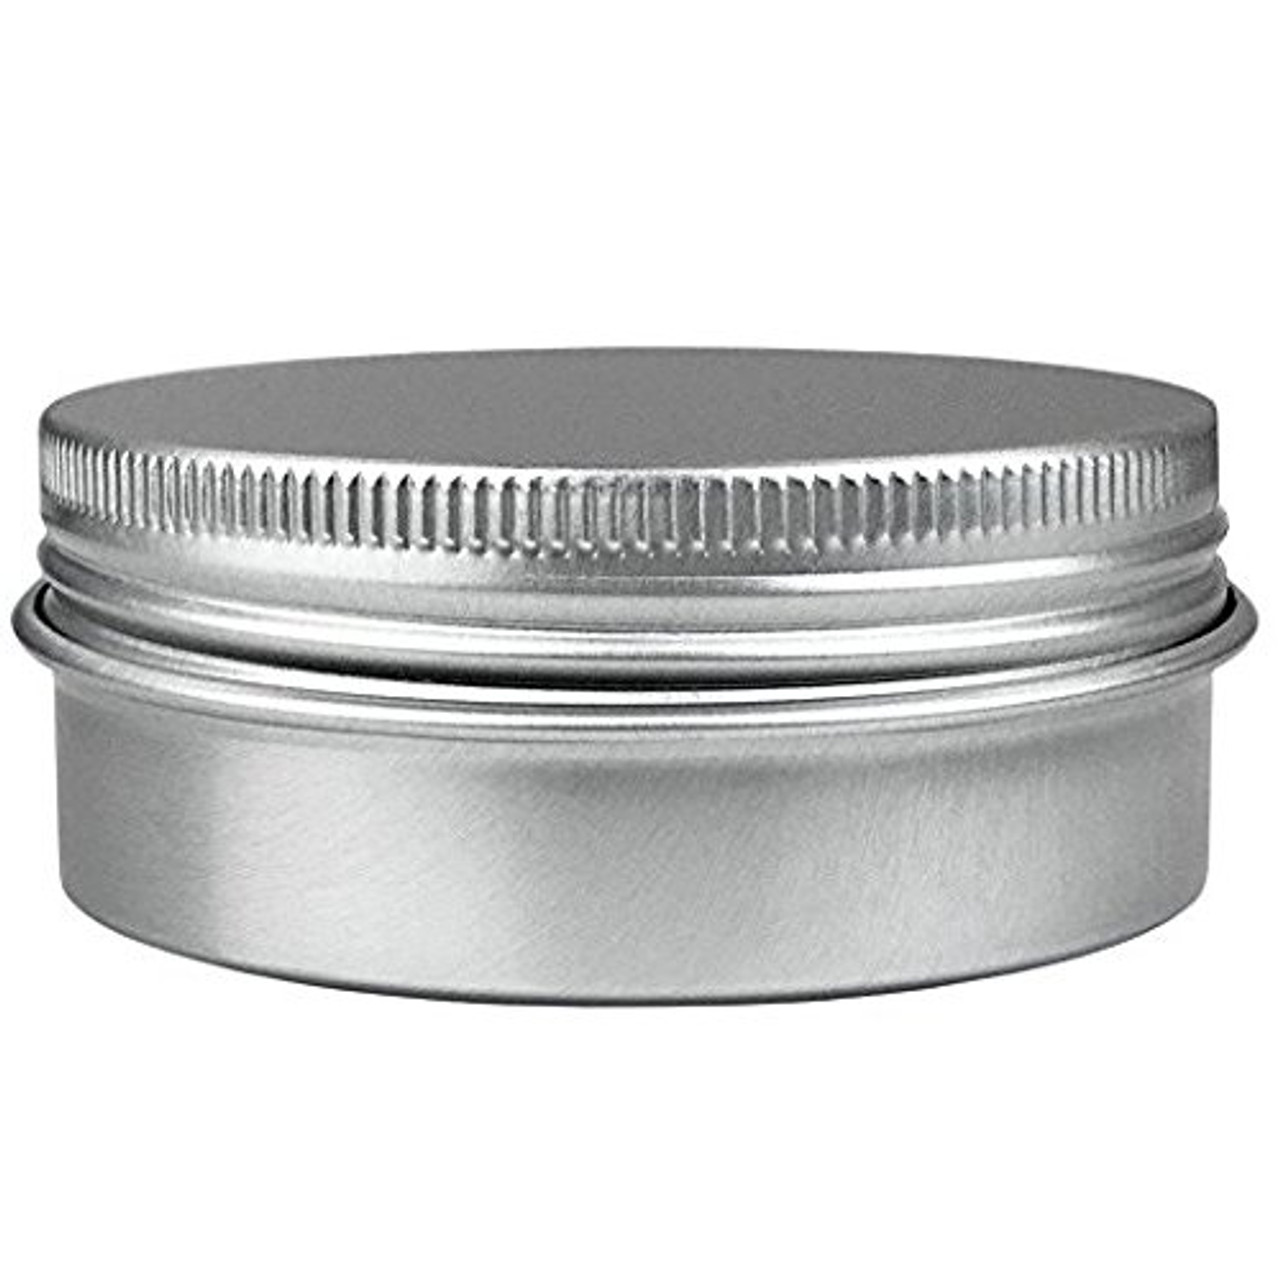 1/2 oz Metal Tins with Lids Mini Tin Containers Aluminum Small Round Tin  Cans Silver Screw Top(24 Pack)